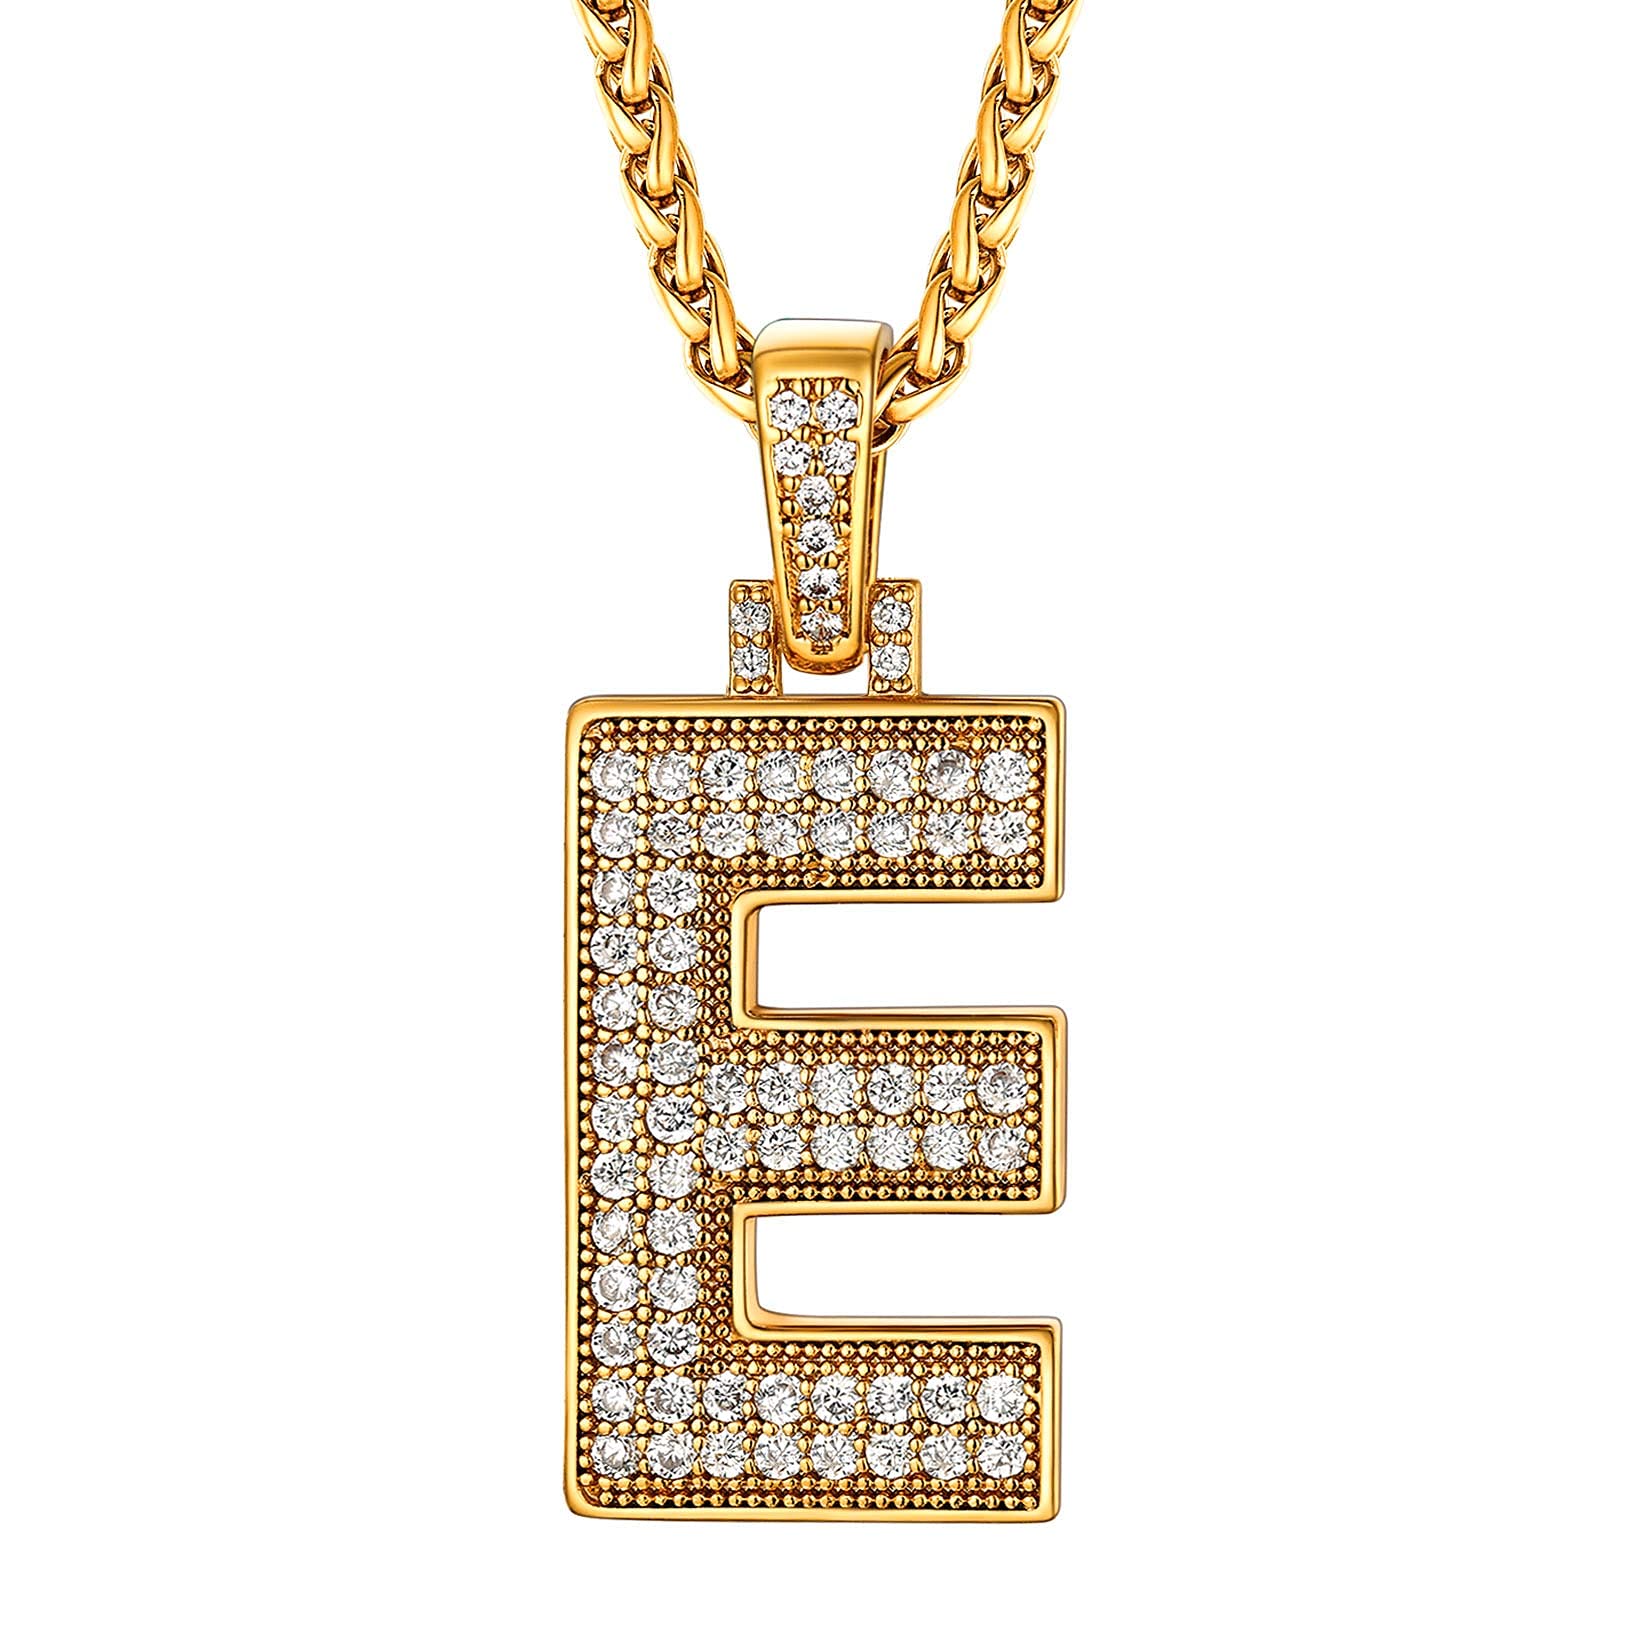 36 X U7 INITIAL E NECKLACE GOLD GIRLS' NECKLACES - TOTAL RRP £444: LOCATION - A RACK